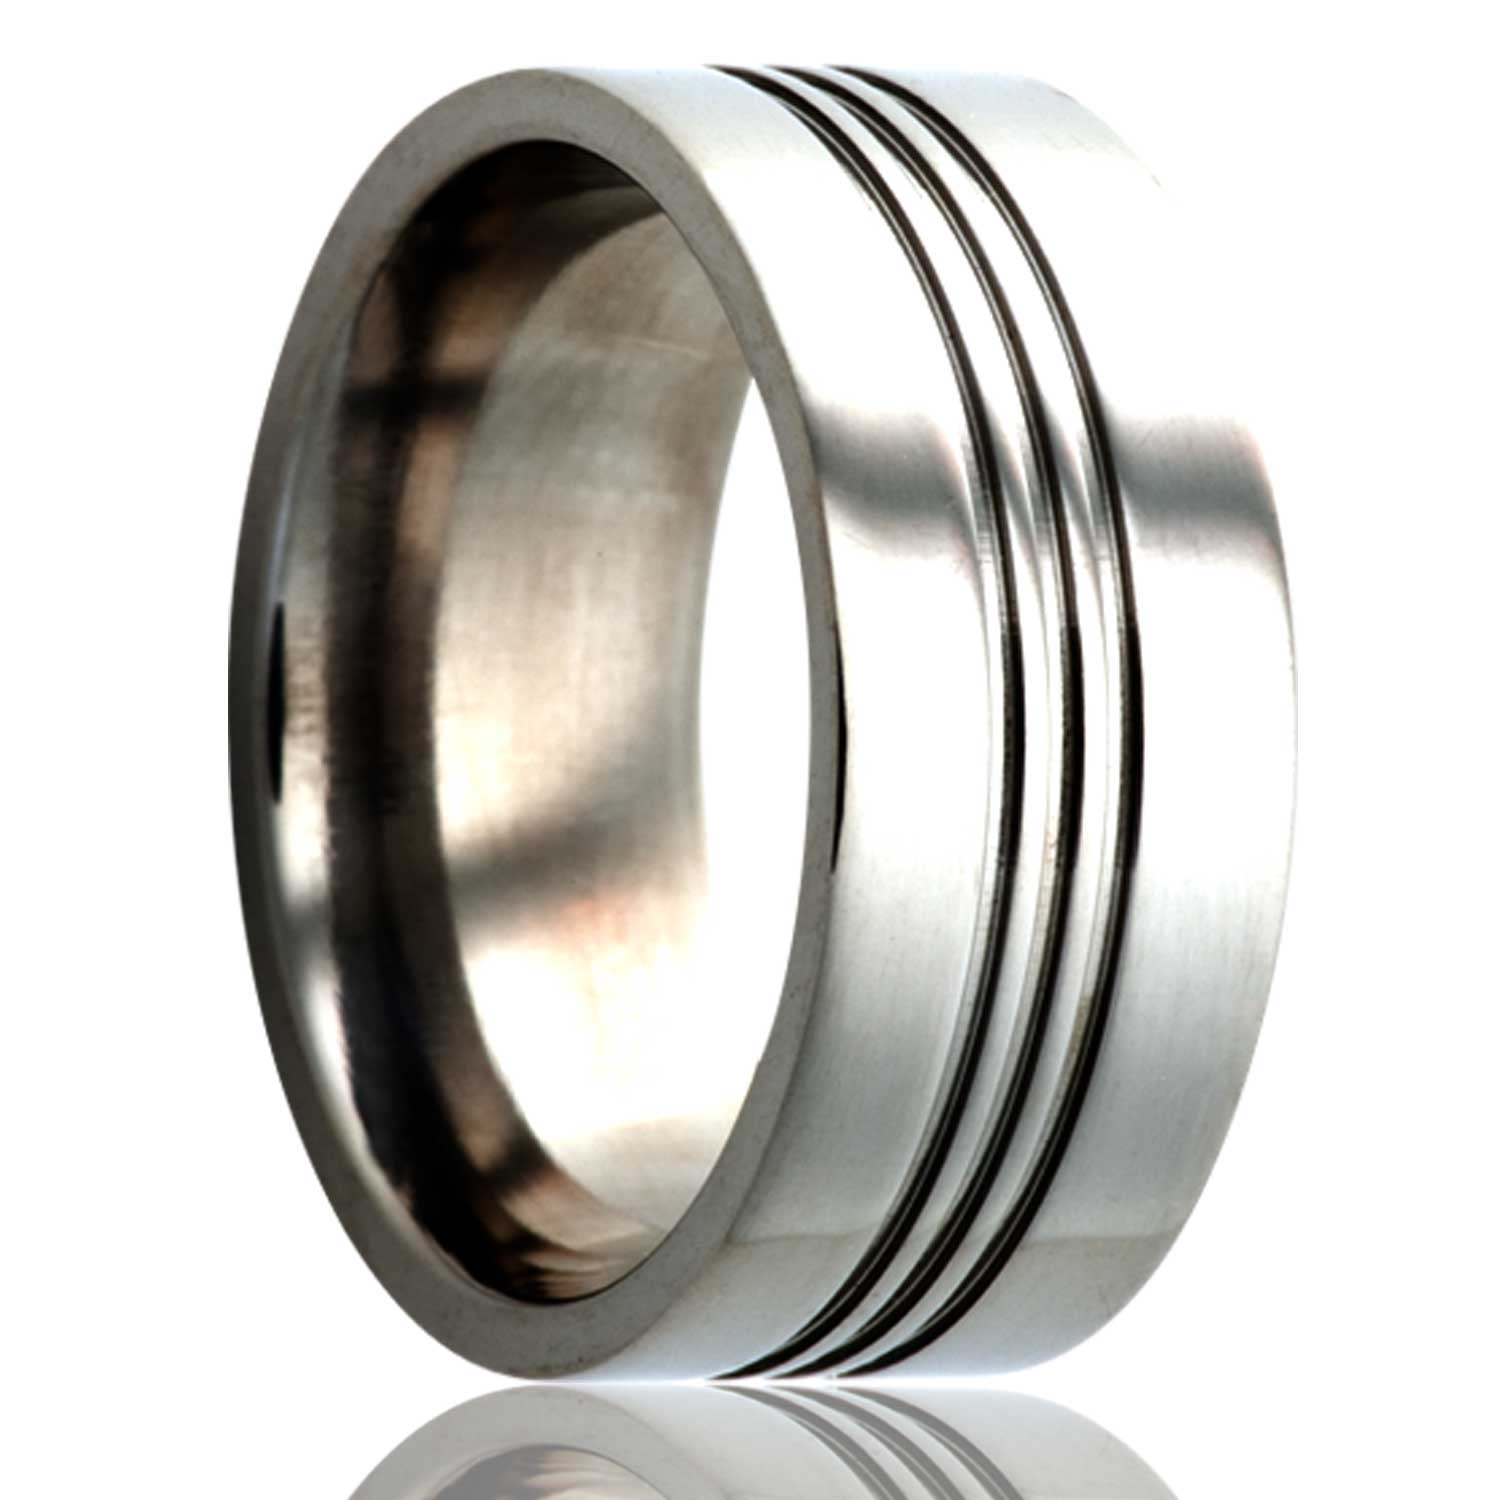 A triple center grooved titanium wedding band displayed on a neutral white background.